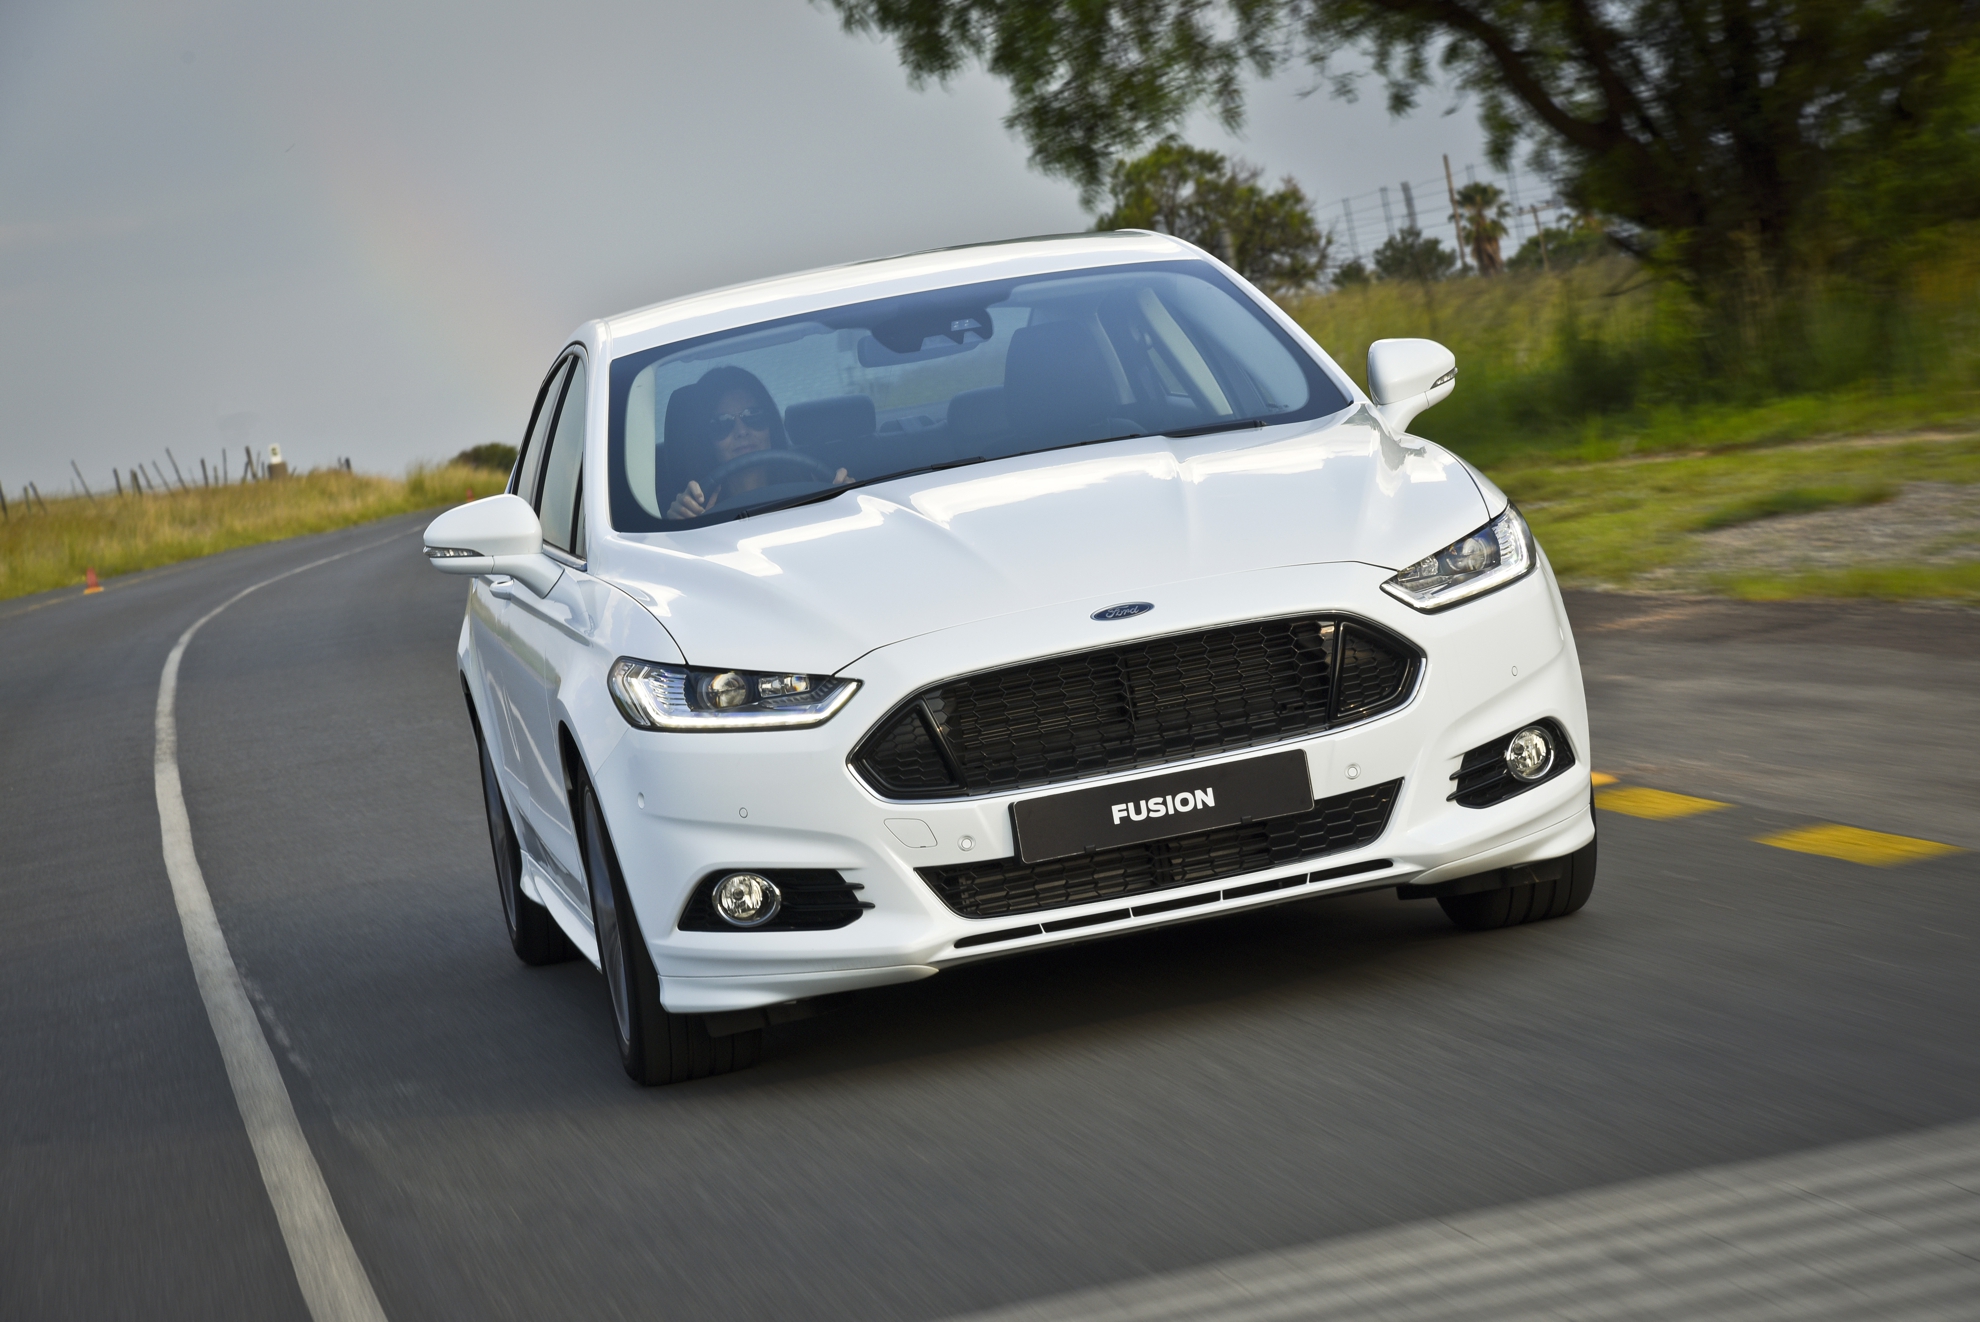 Ford Fusion Enhances Comfort with Sophisticated Technology, Innovative Chassis and Noise-Reducing Body